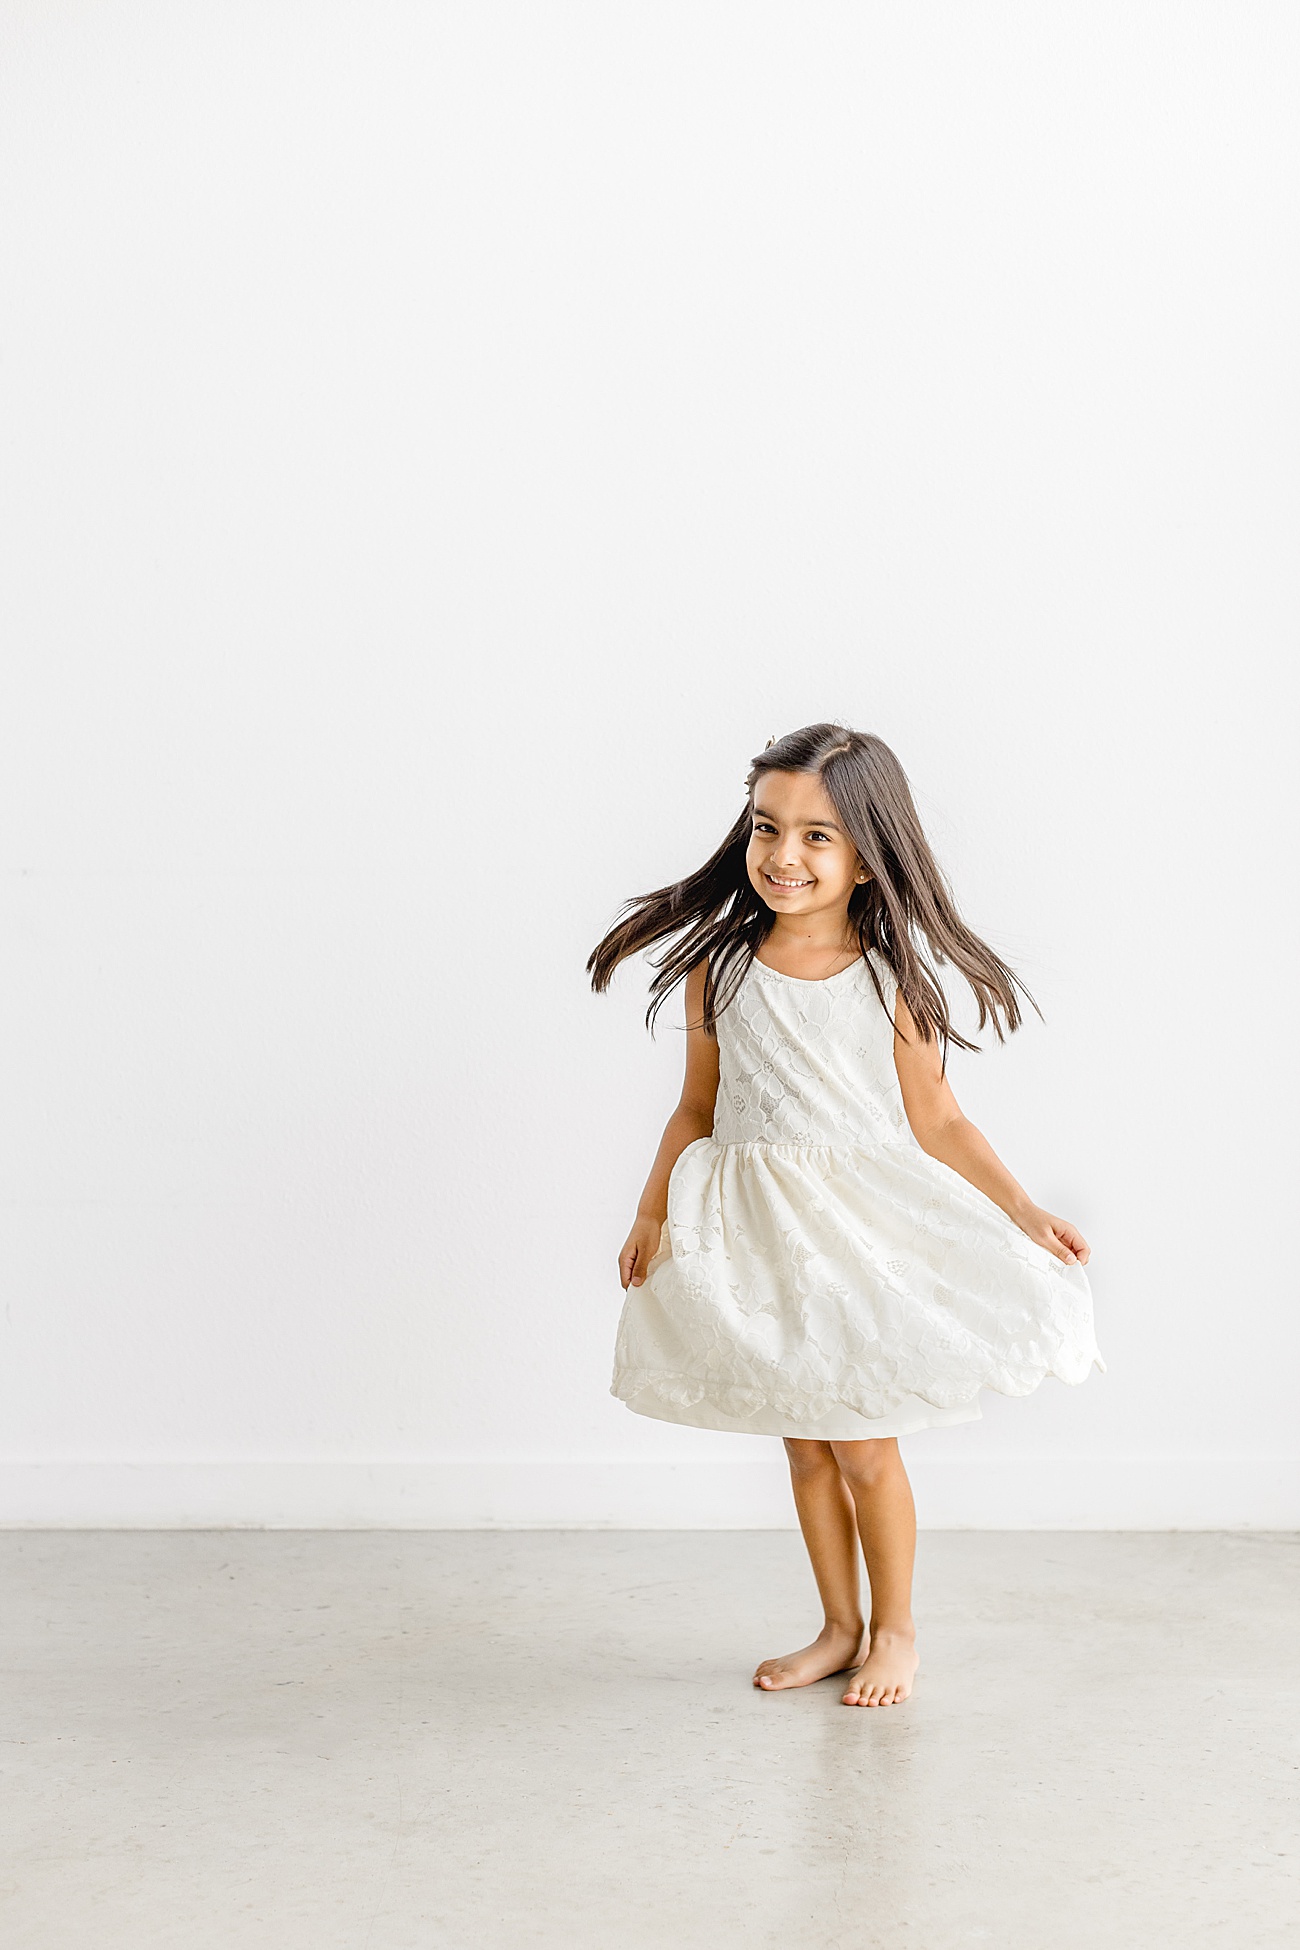 Little girl twirling in white dress in studio. Photo by Sana Ahmed Photography.